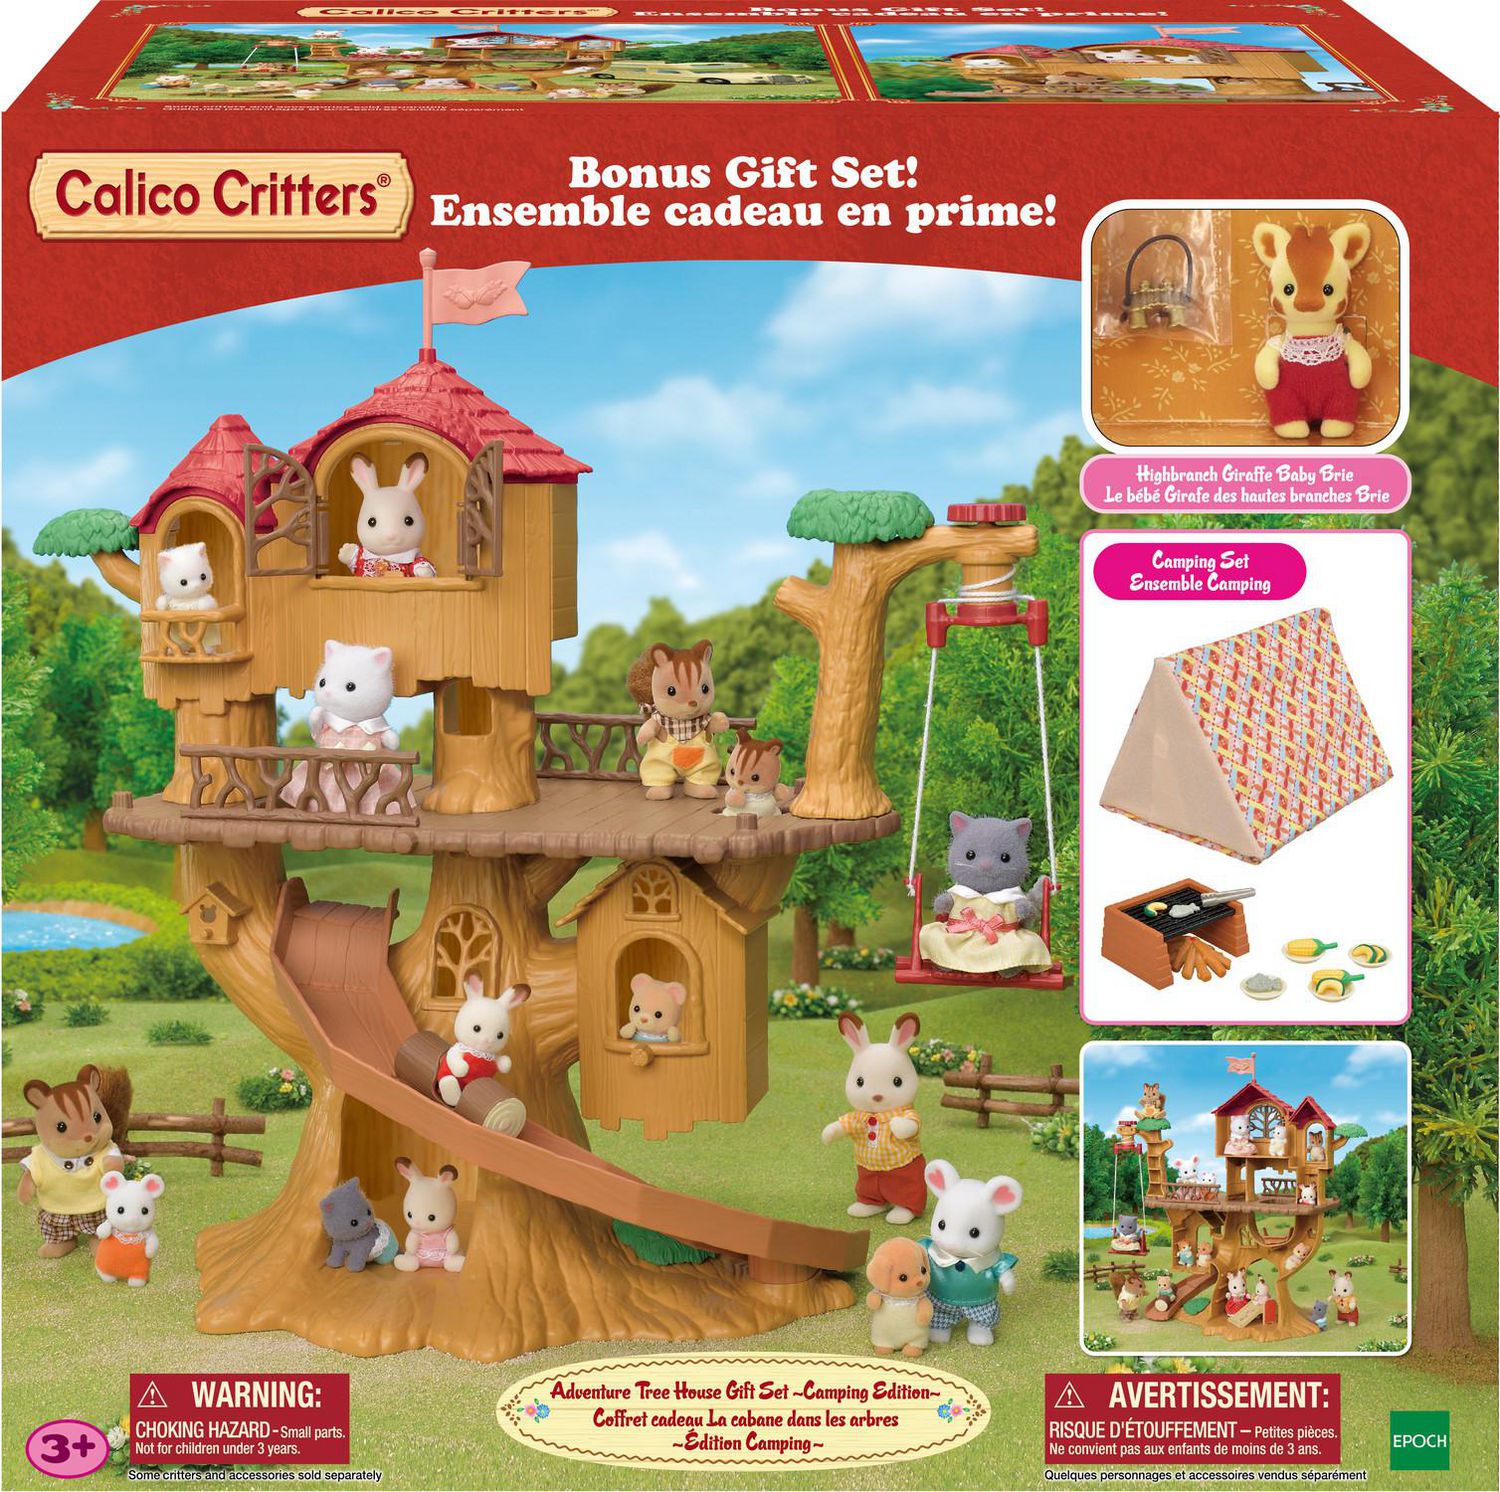 Calico Critters Adventure Treehouse Gift Set - Camping Edition